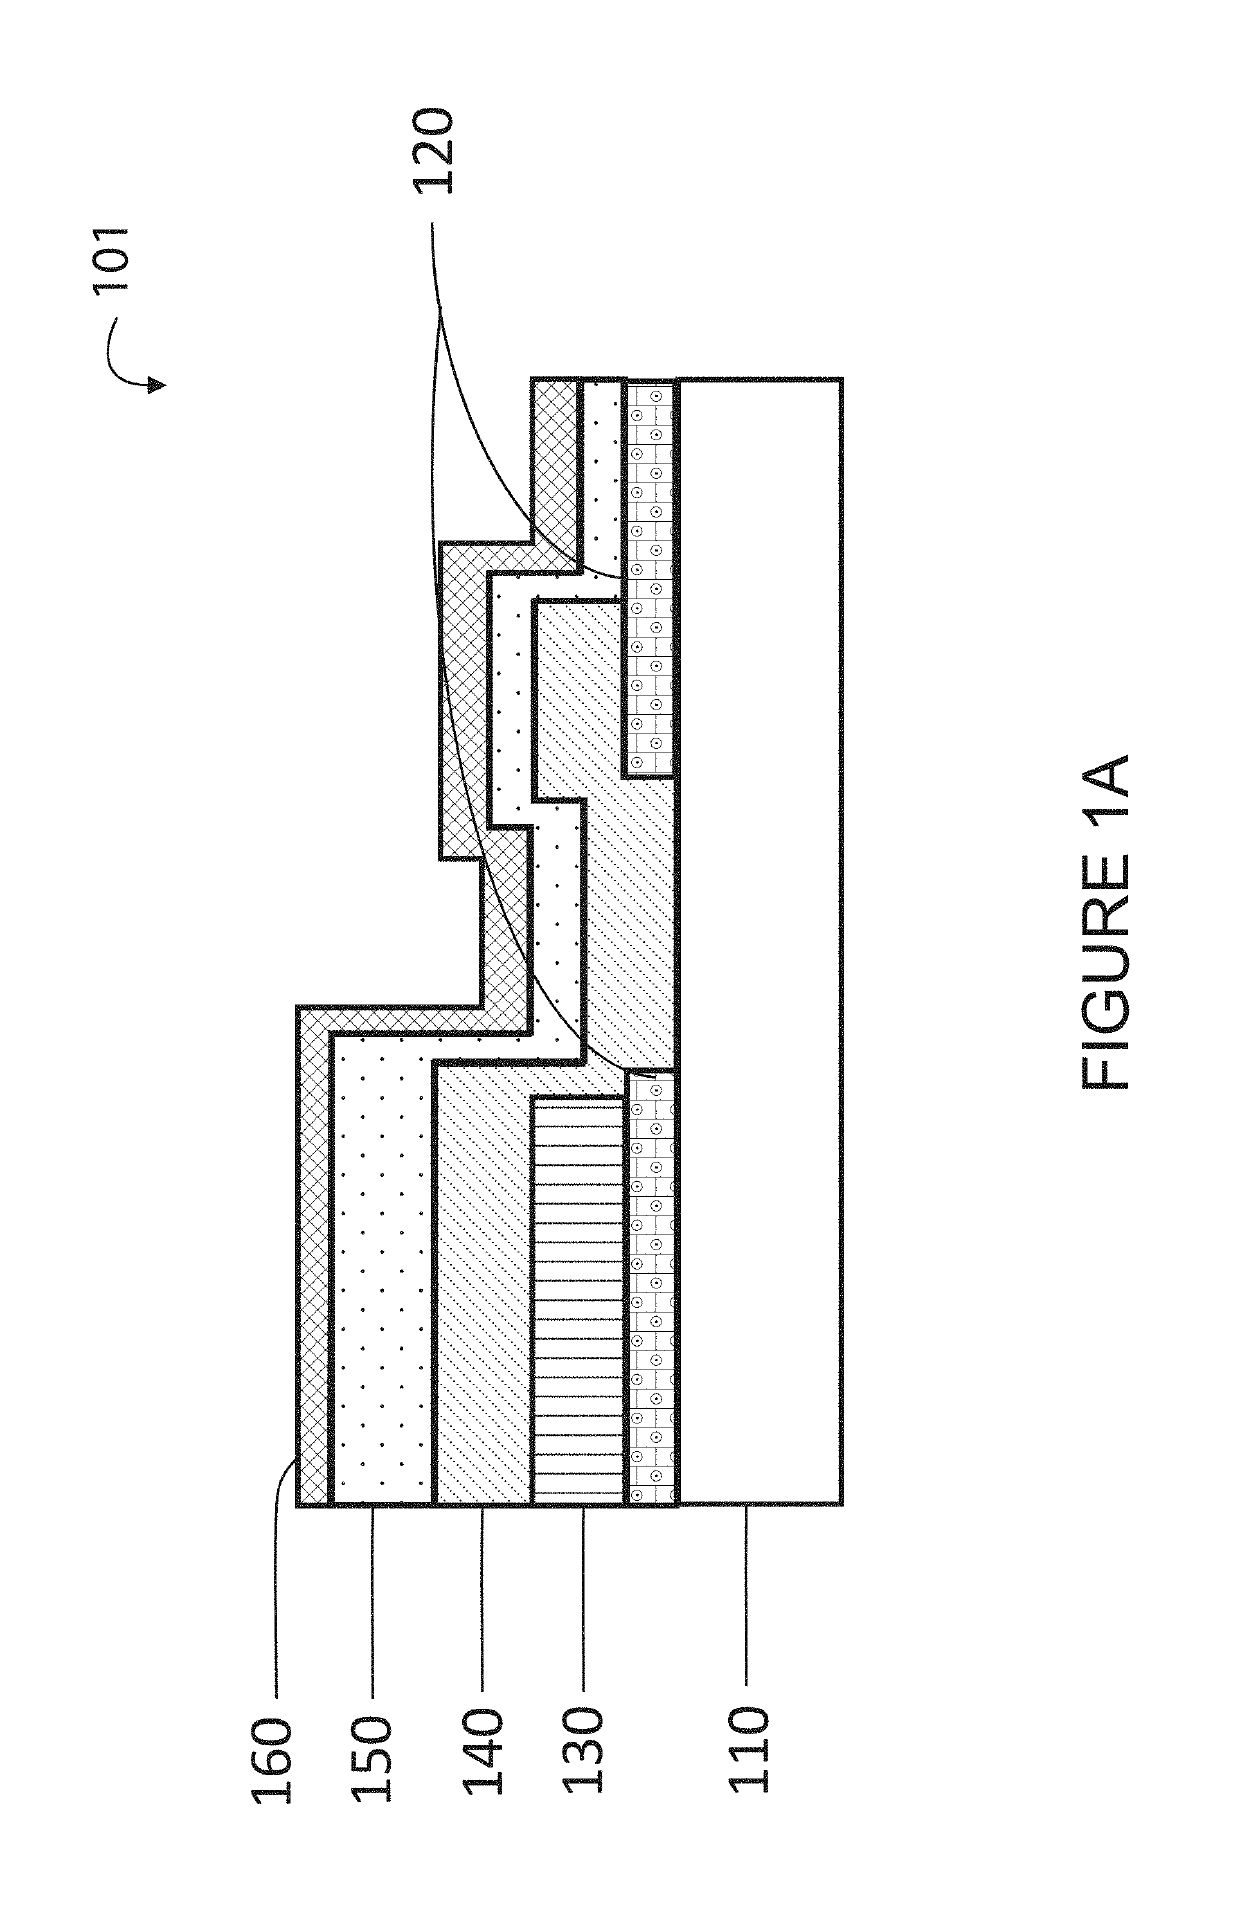 Multiple active and inter layers in a solid-state device